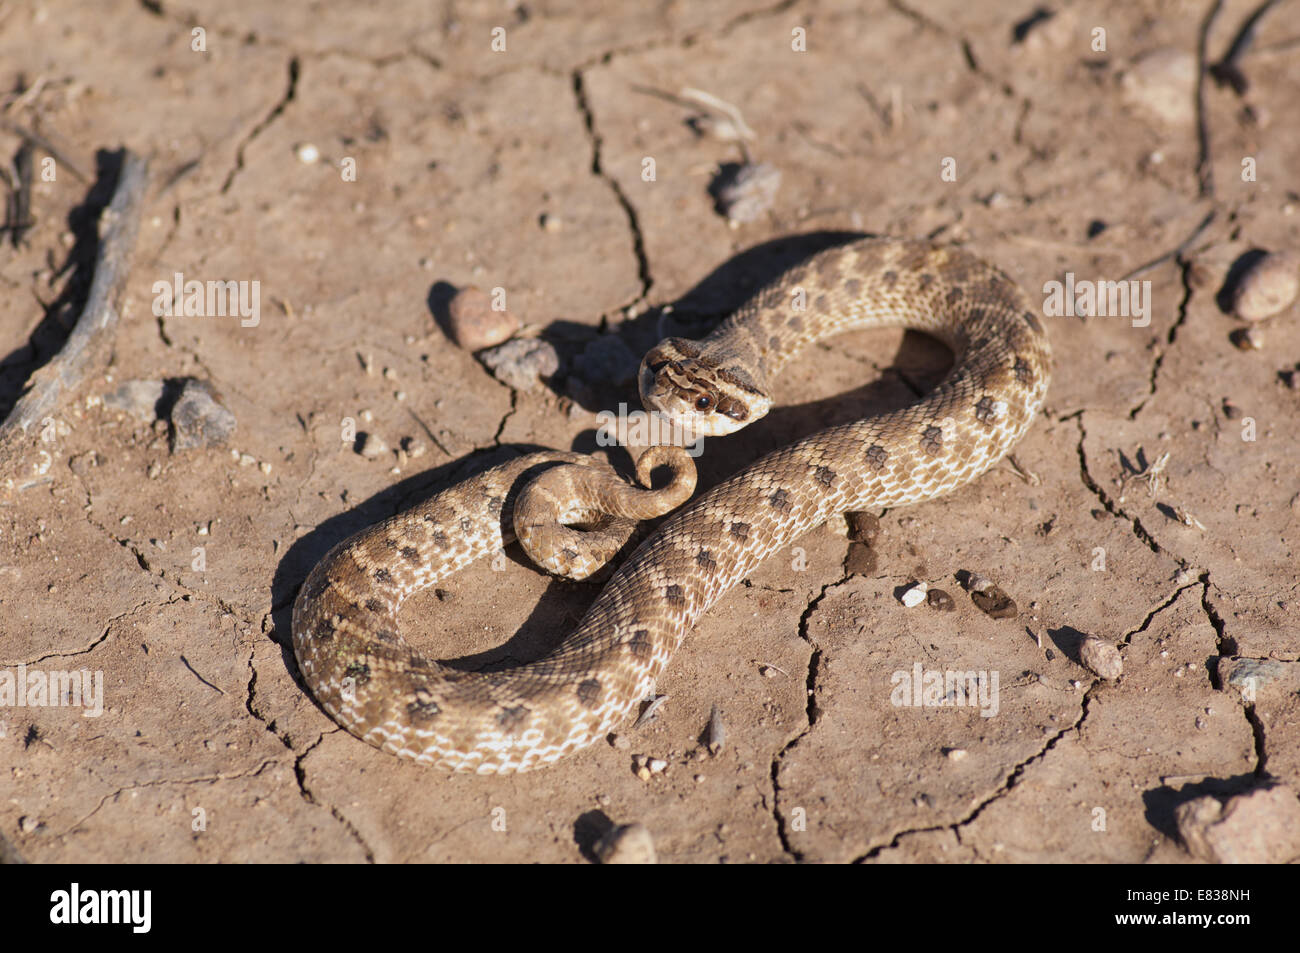 A juvenile Mexican Hog-nosed Snake (Heterodon kennerlyi) on the dry desert floor in Hidalgo County, New Mexico. Stock Photo